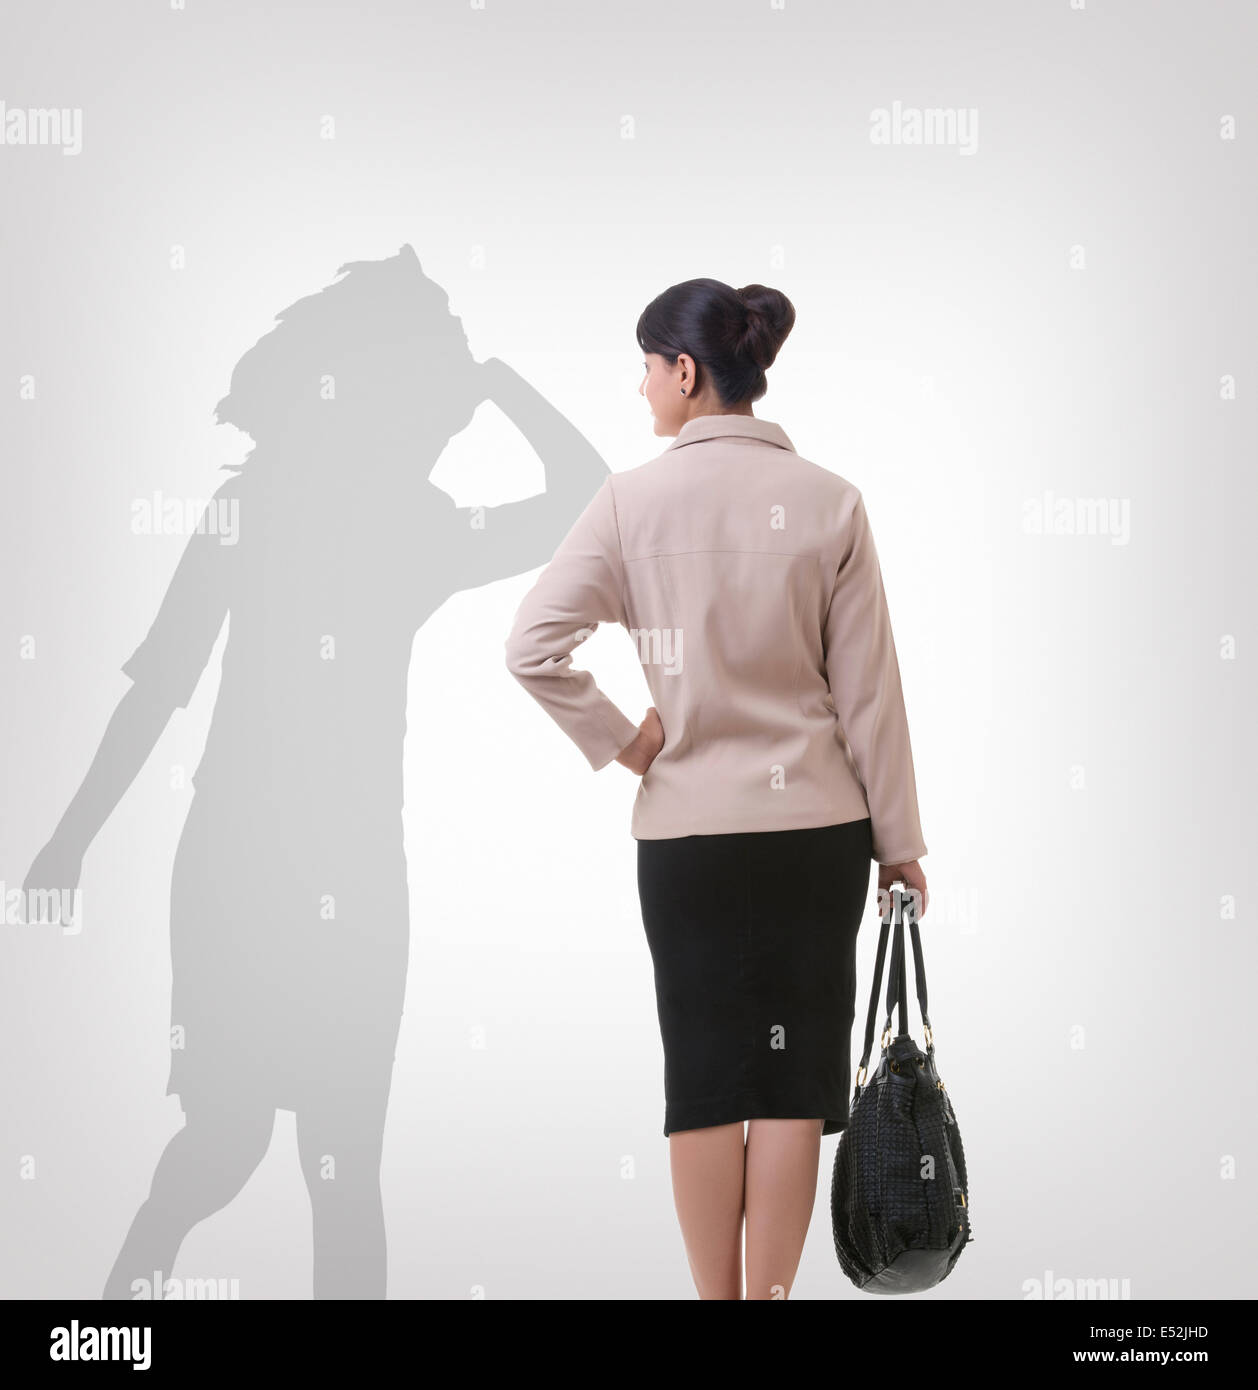 Rear view of businesswoman looking at her shadow dancing over gray background Stock Photo